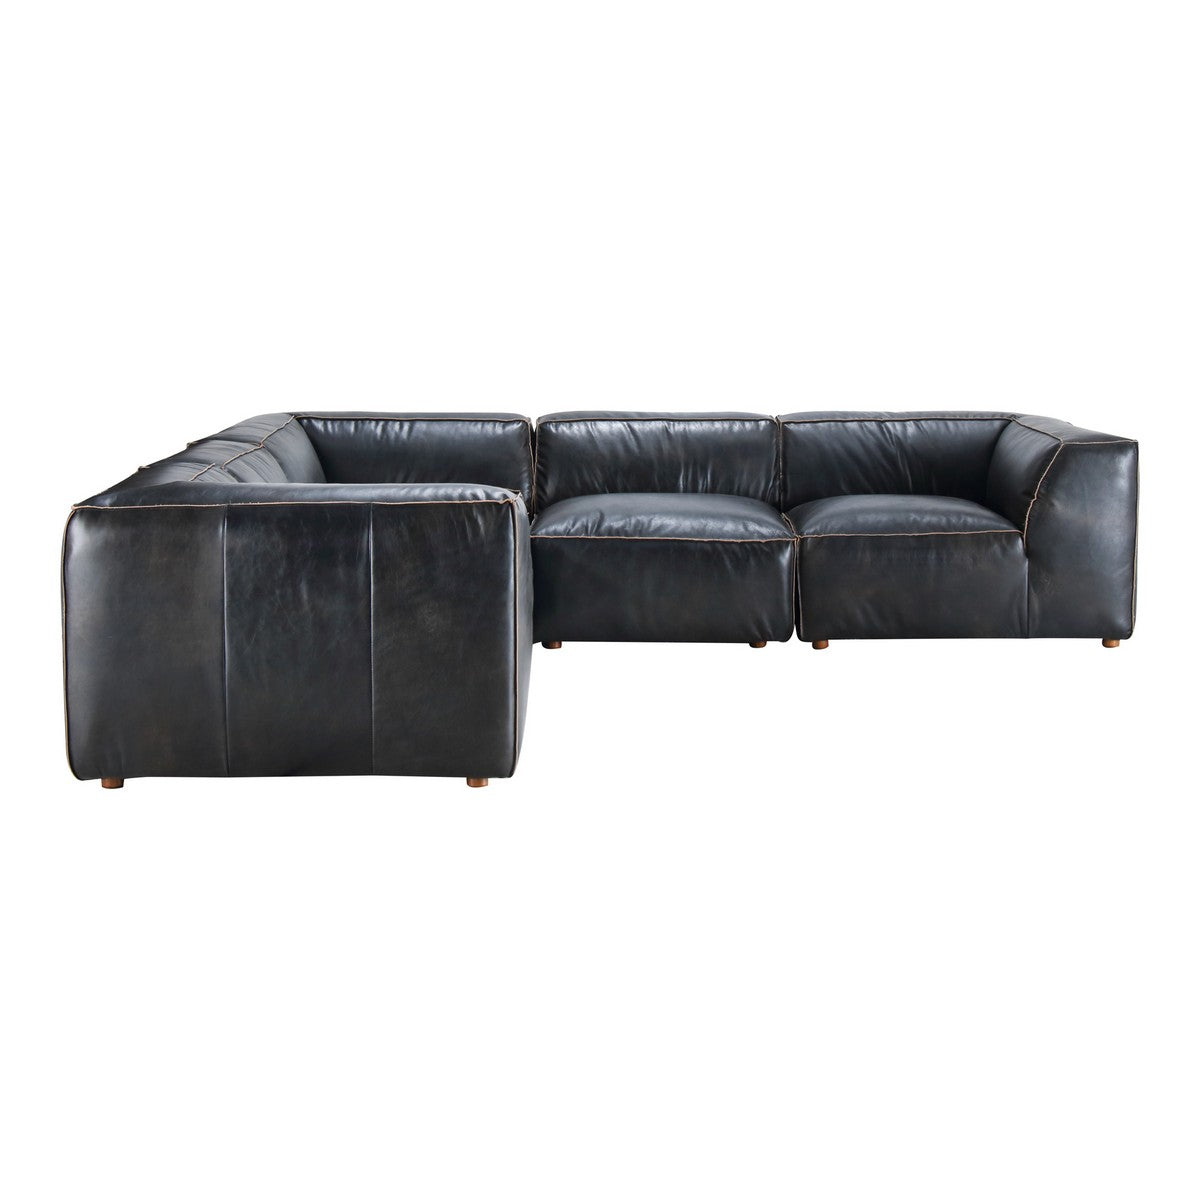 Moe's Home Collection Luxe Classic L Modular Sectional Antique Black - QN-1025-01